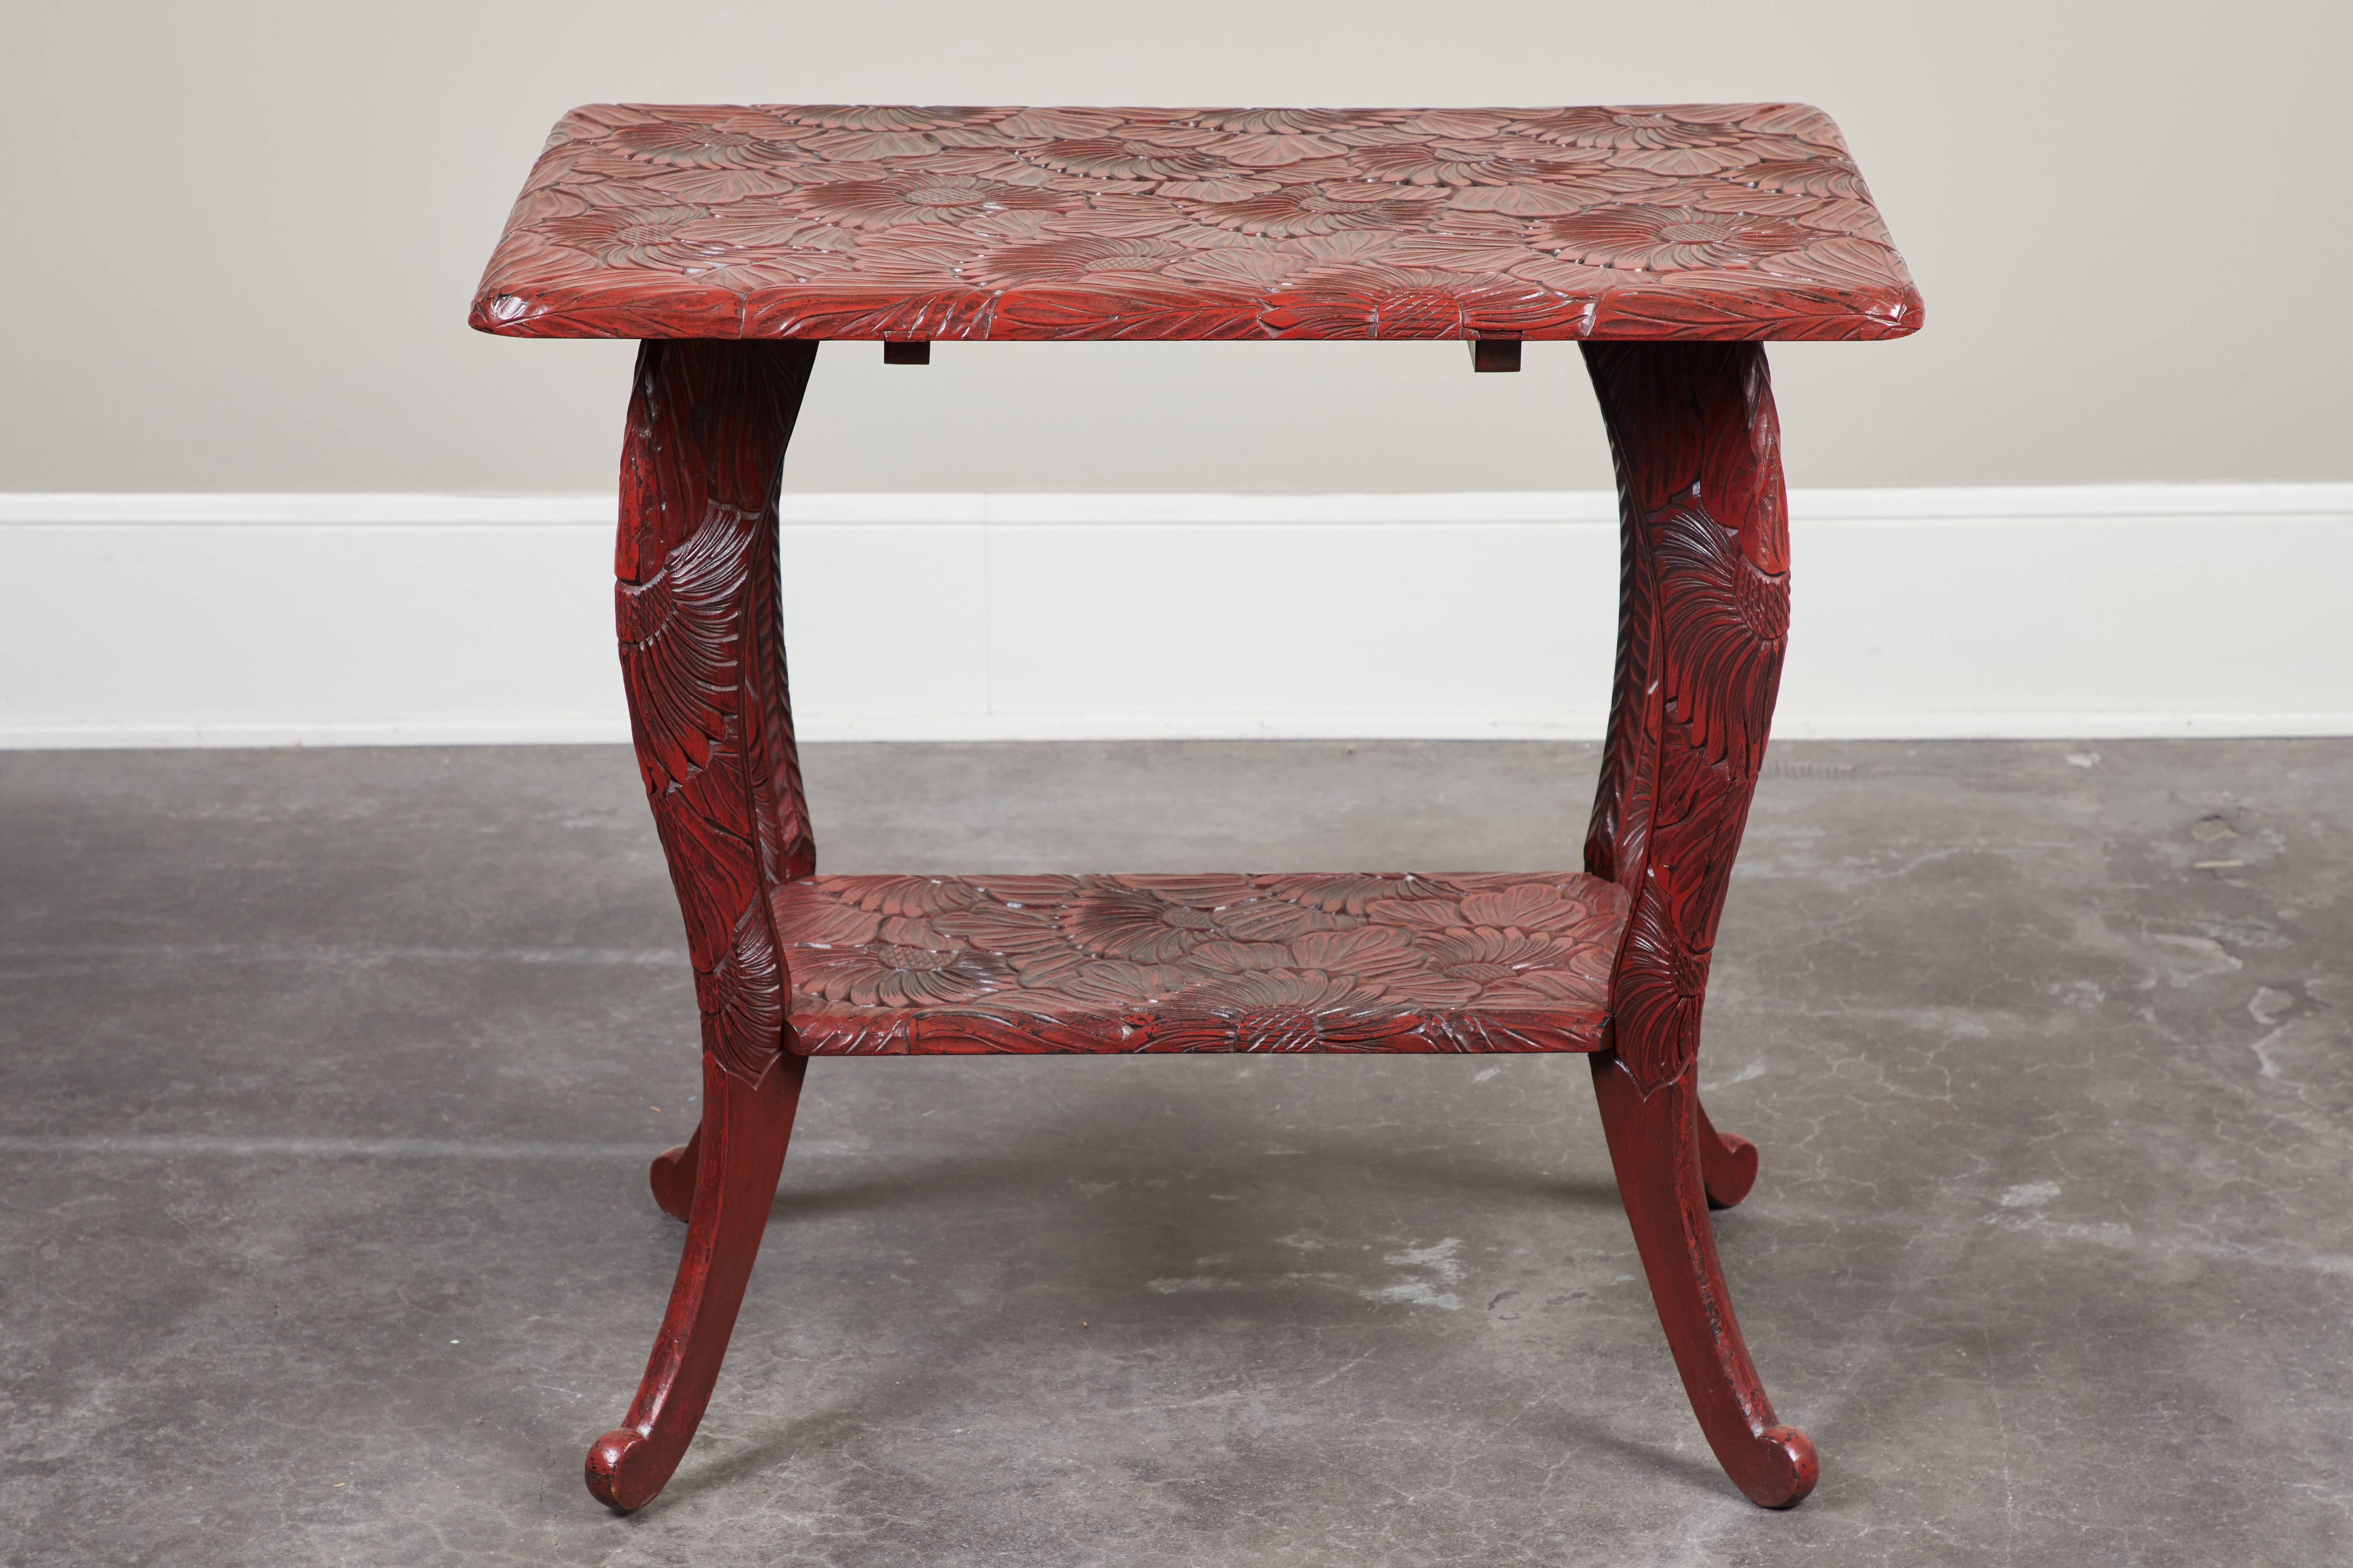 An early 20th century intricately carved floral red lacquer side table with a single shelf inside splayed legs.